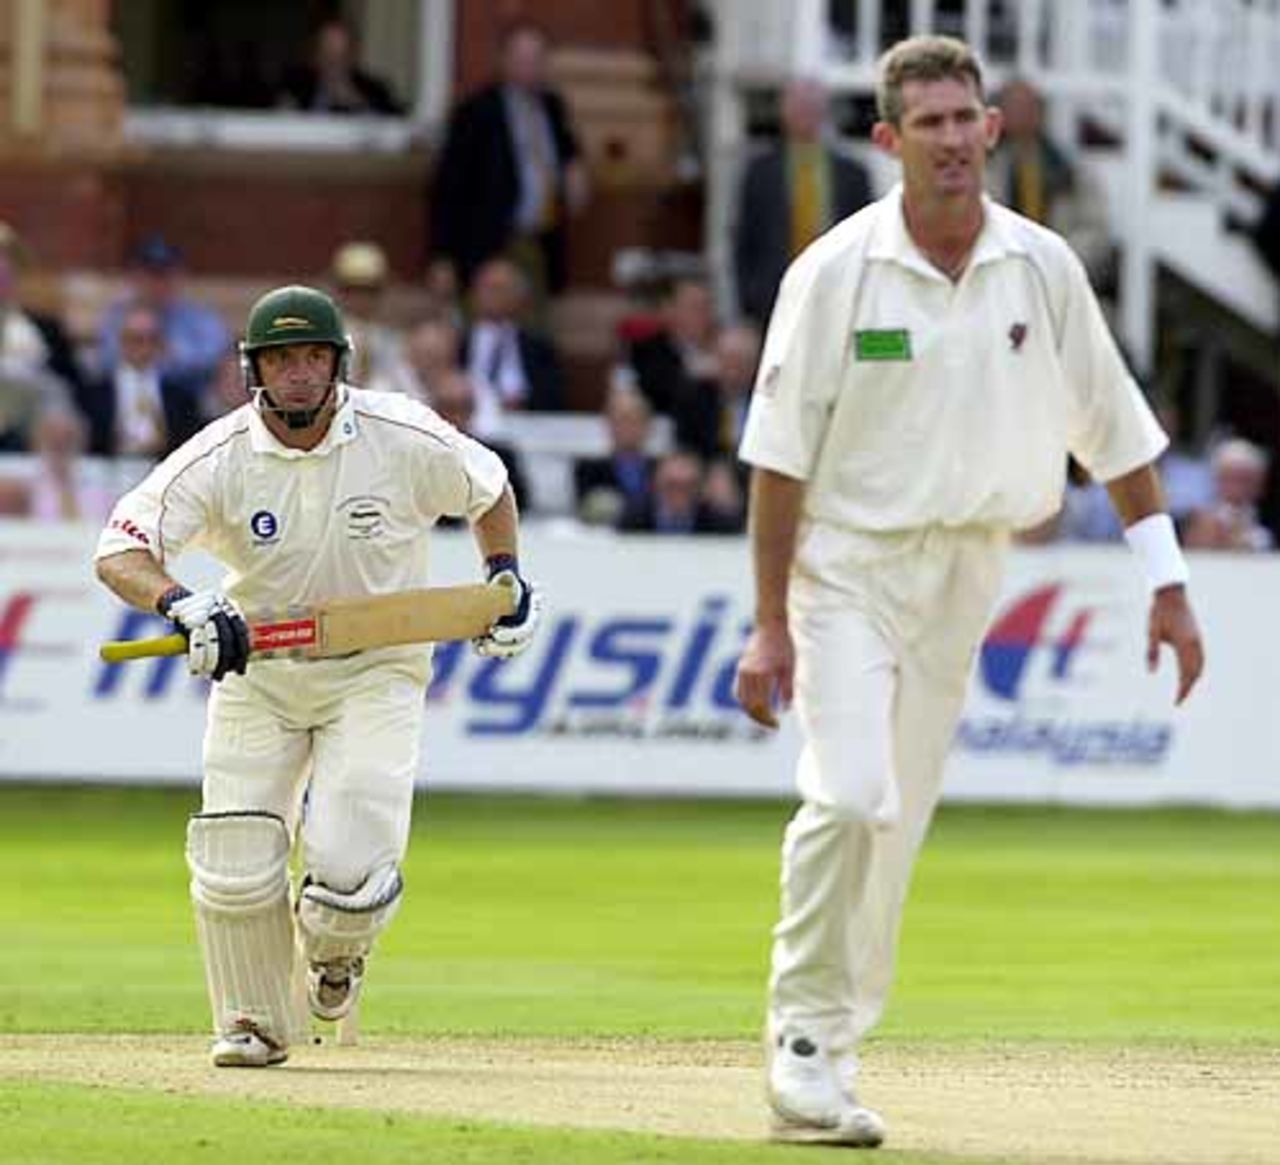 Trevor Ward pushes a Caddick delivery back past the bowler, C&G Trophy final, Lord's, Sat 1 Sep 2001